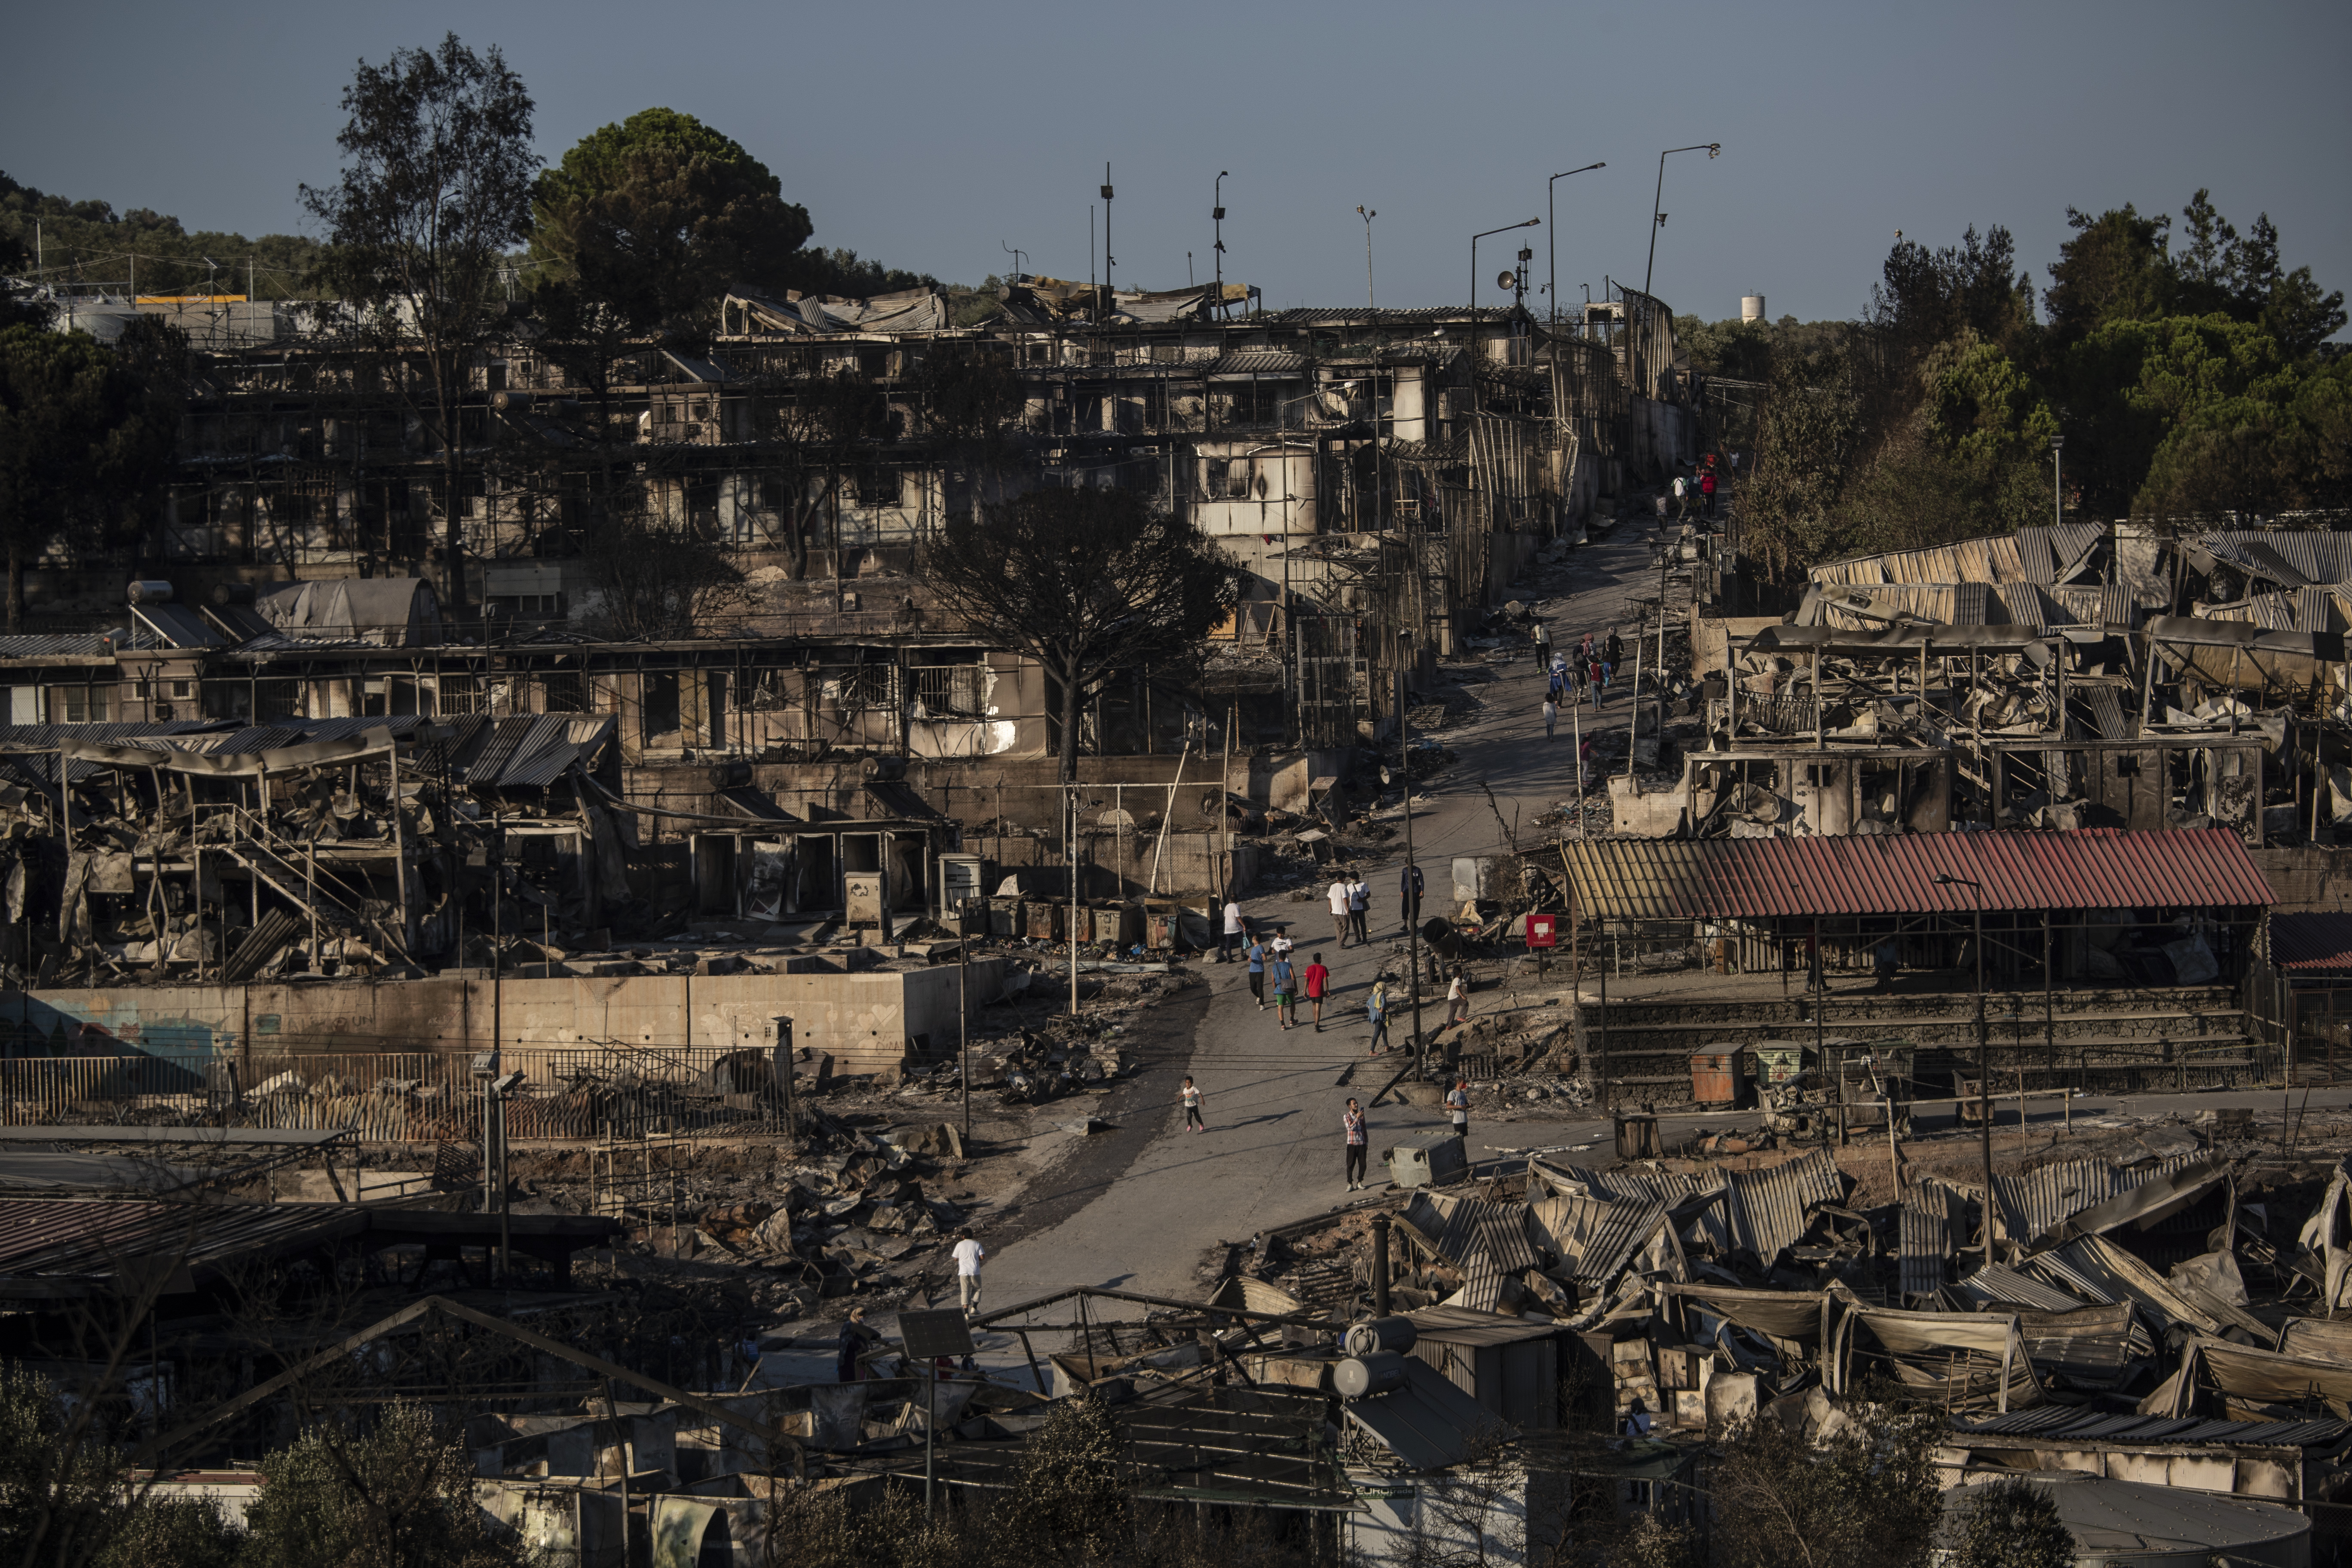 Refugees and migrants walk inside the destroyed Moria camp on Lesbos island, Greece, Wednesday, Sept. 9, 2020. More than 12,000 people were left homeless after fires gutted the sprawling Moria refugee camp. The camp's life ended as it began, in drama: Successive fires that started before dawn on Sept. 9 devastating the site and making 12,000 inhabitants homeless during a COVD-19 lockdown. (AP Photo/Petros Giannakouris)